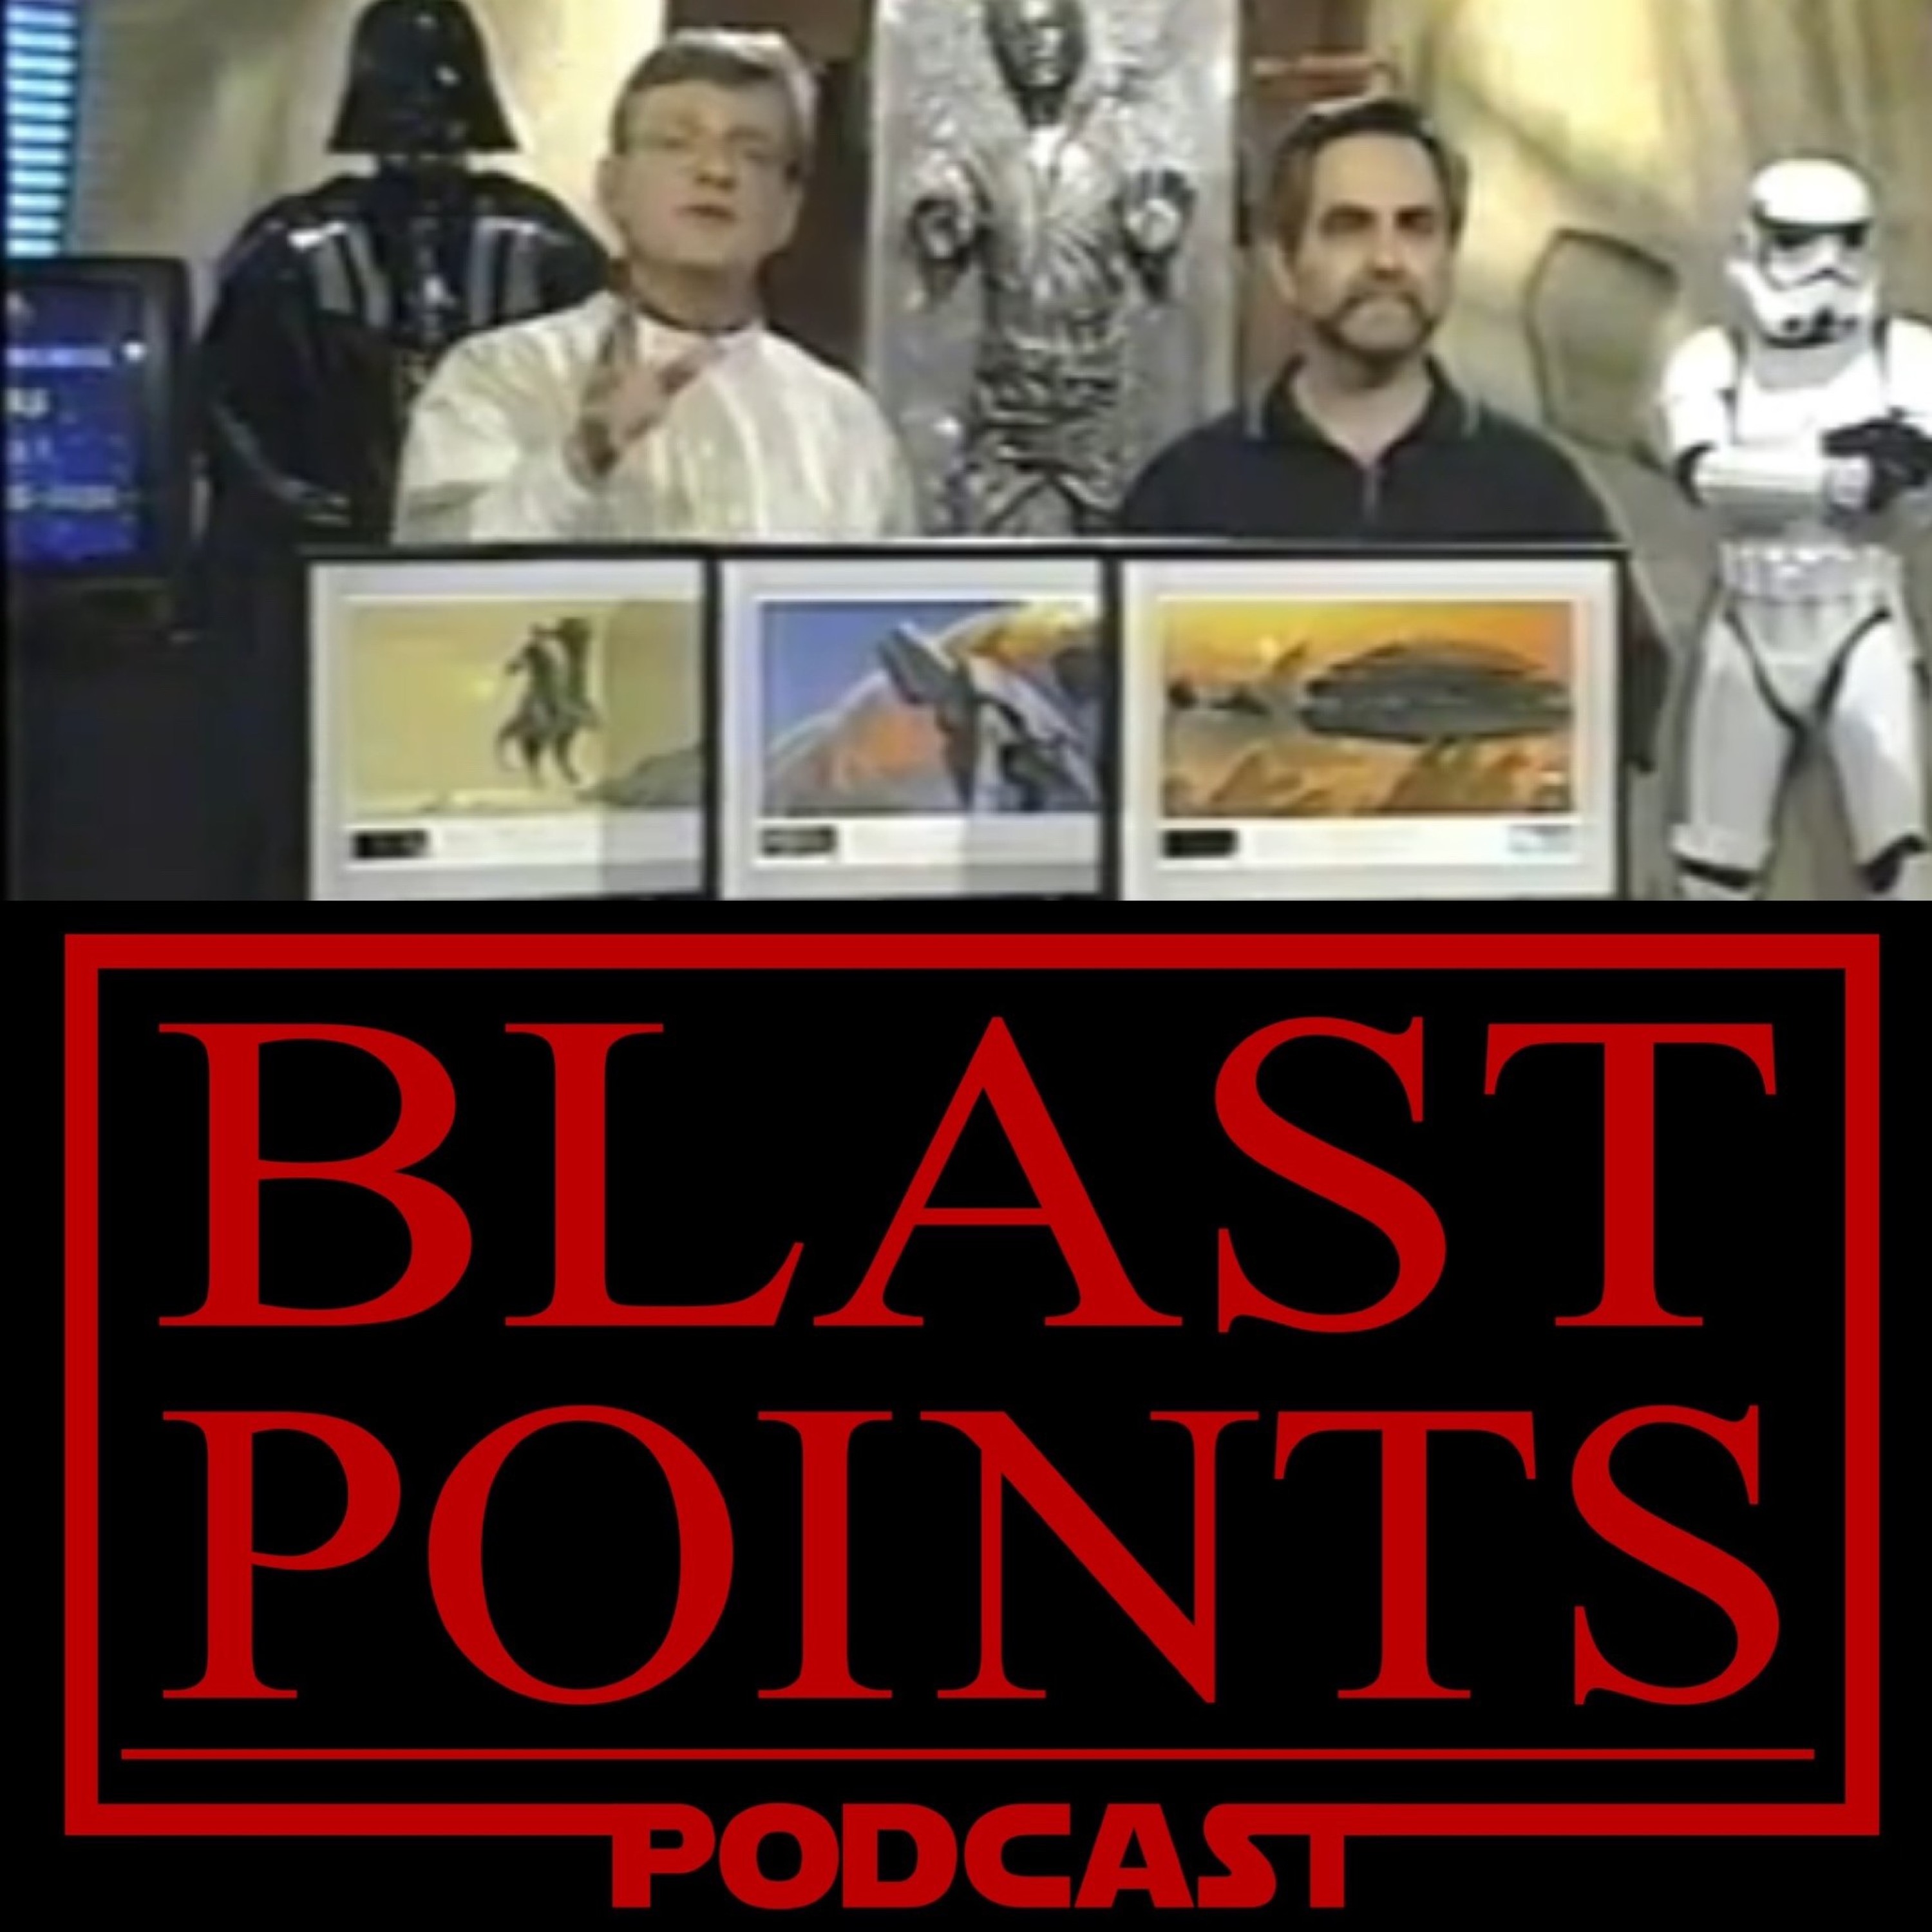 Episode 371 - The QVC Star Wars Specials Strike Back